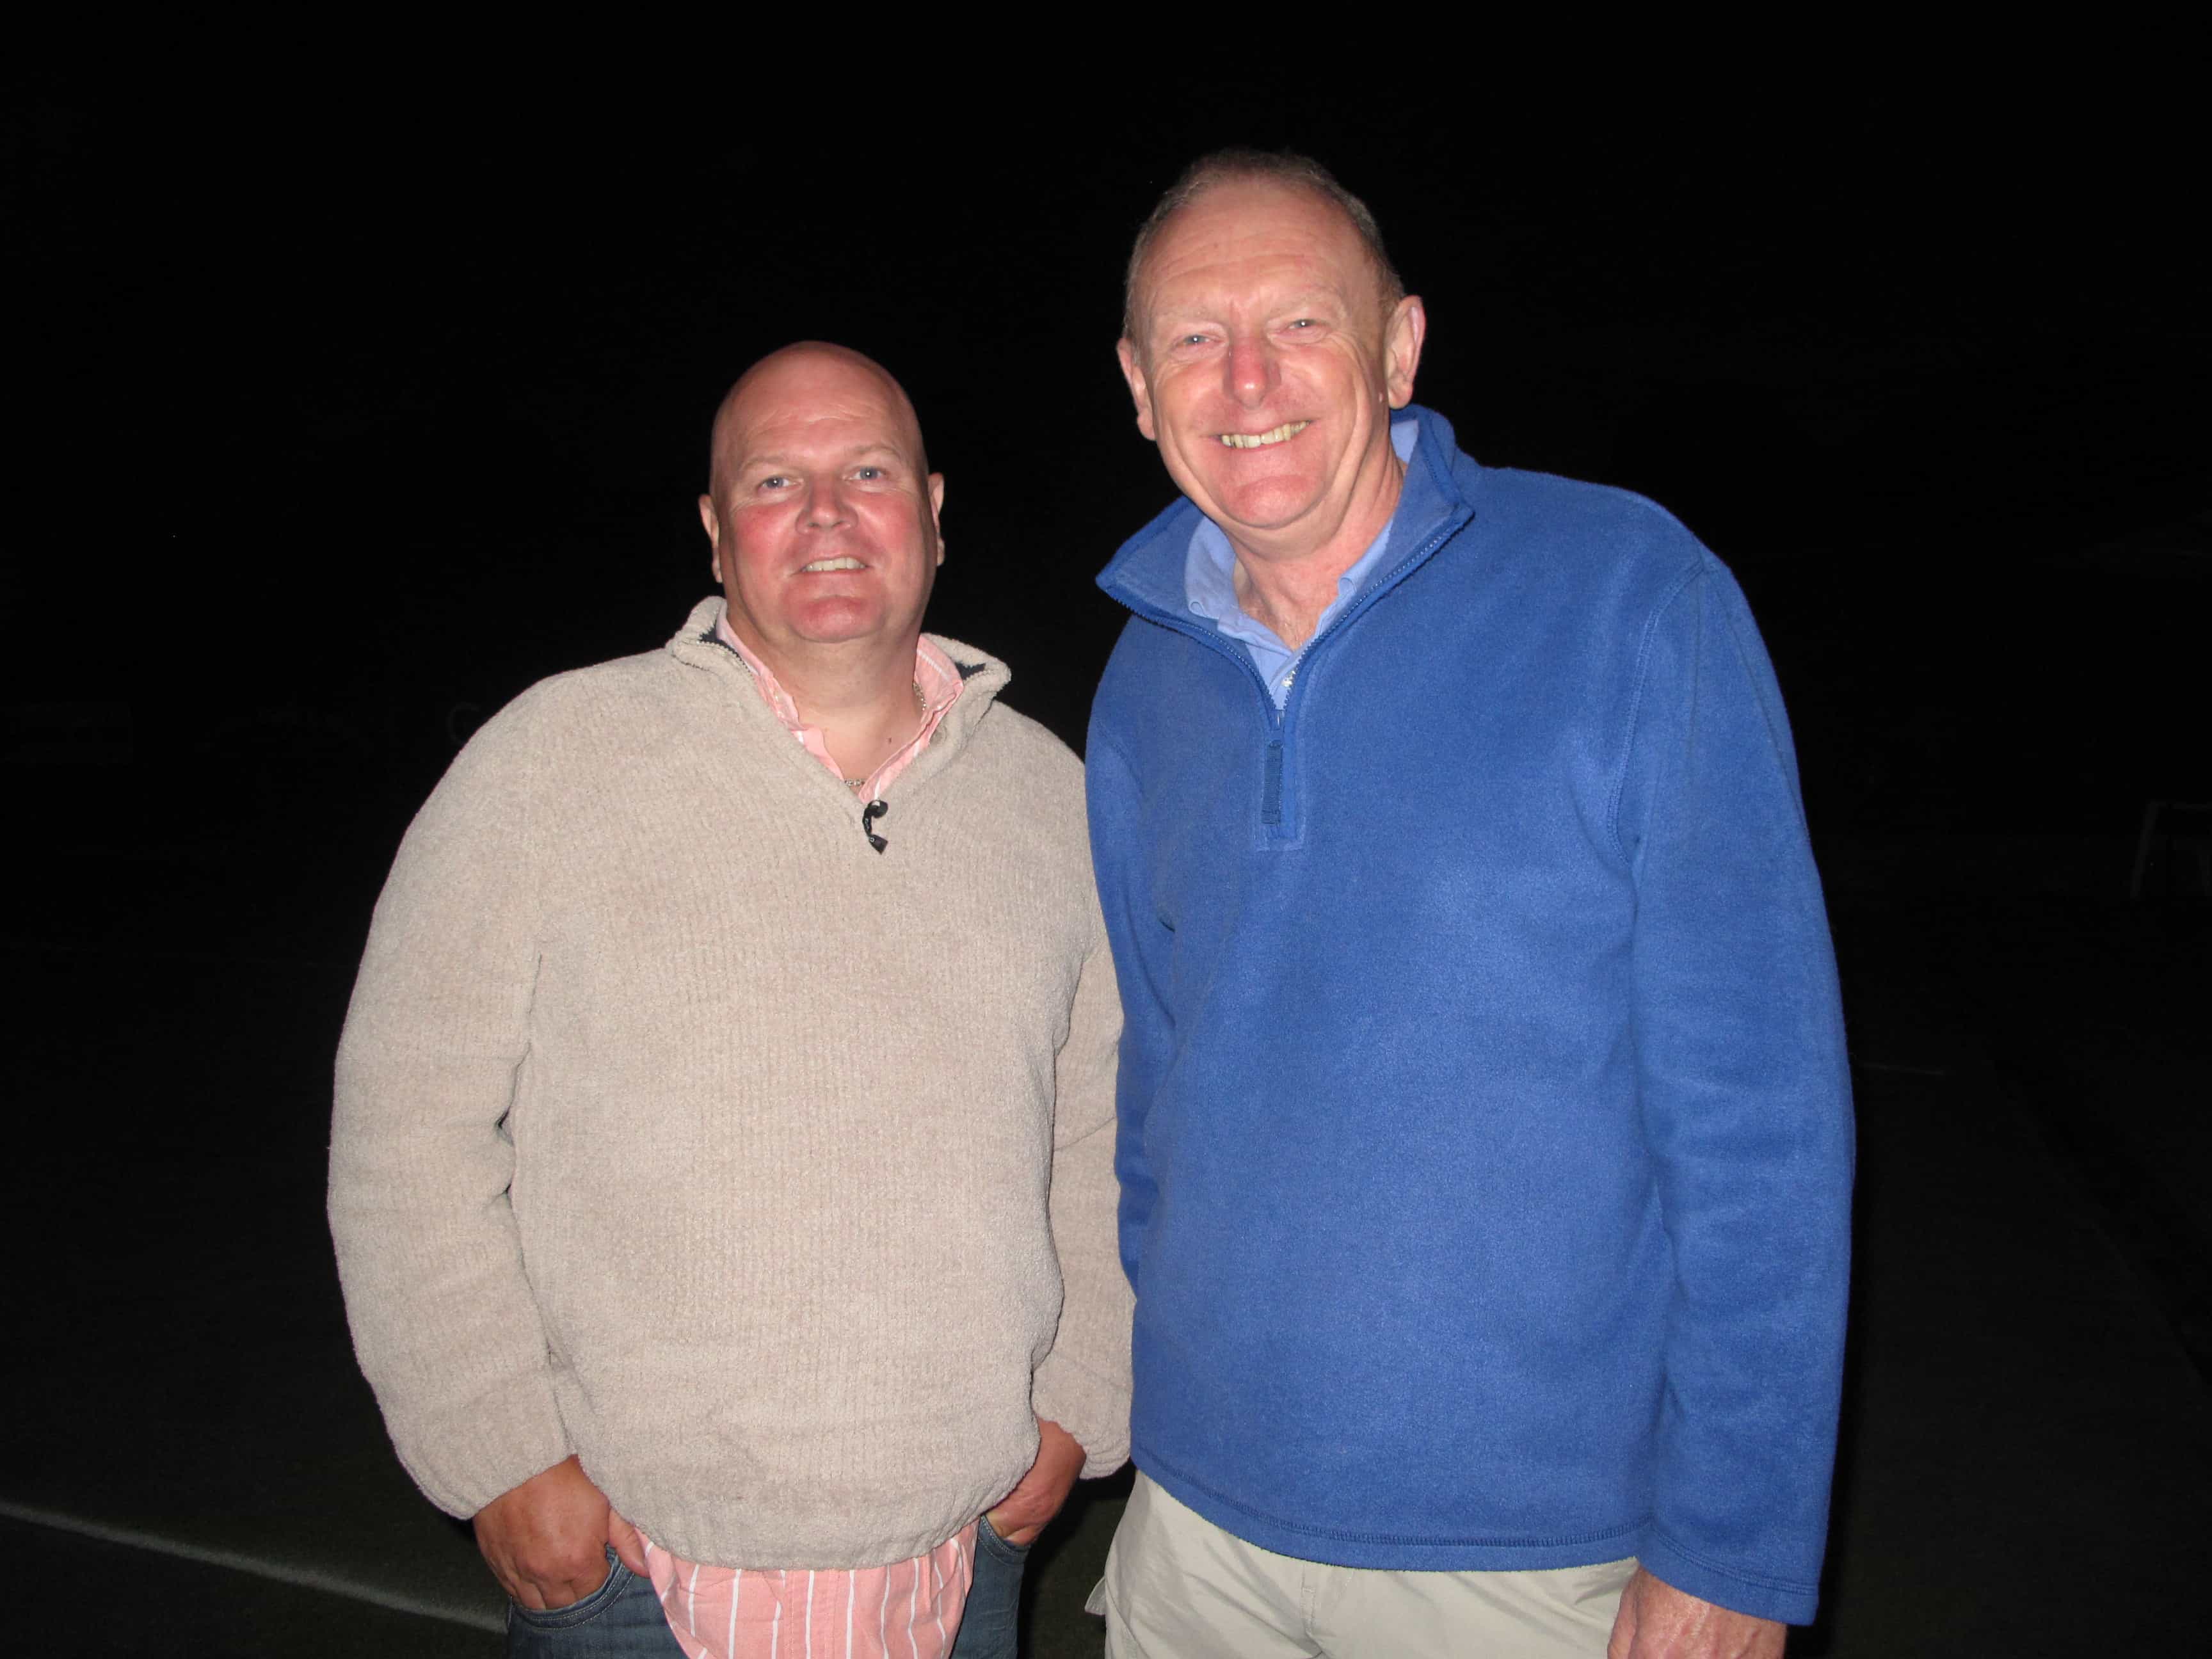 Tony Kershaw and Mike Kewley - Kidneys For Life patients.